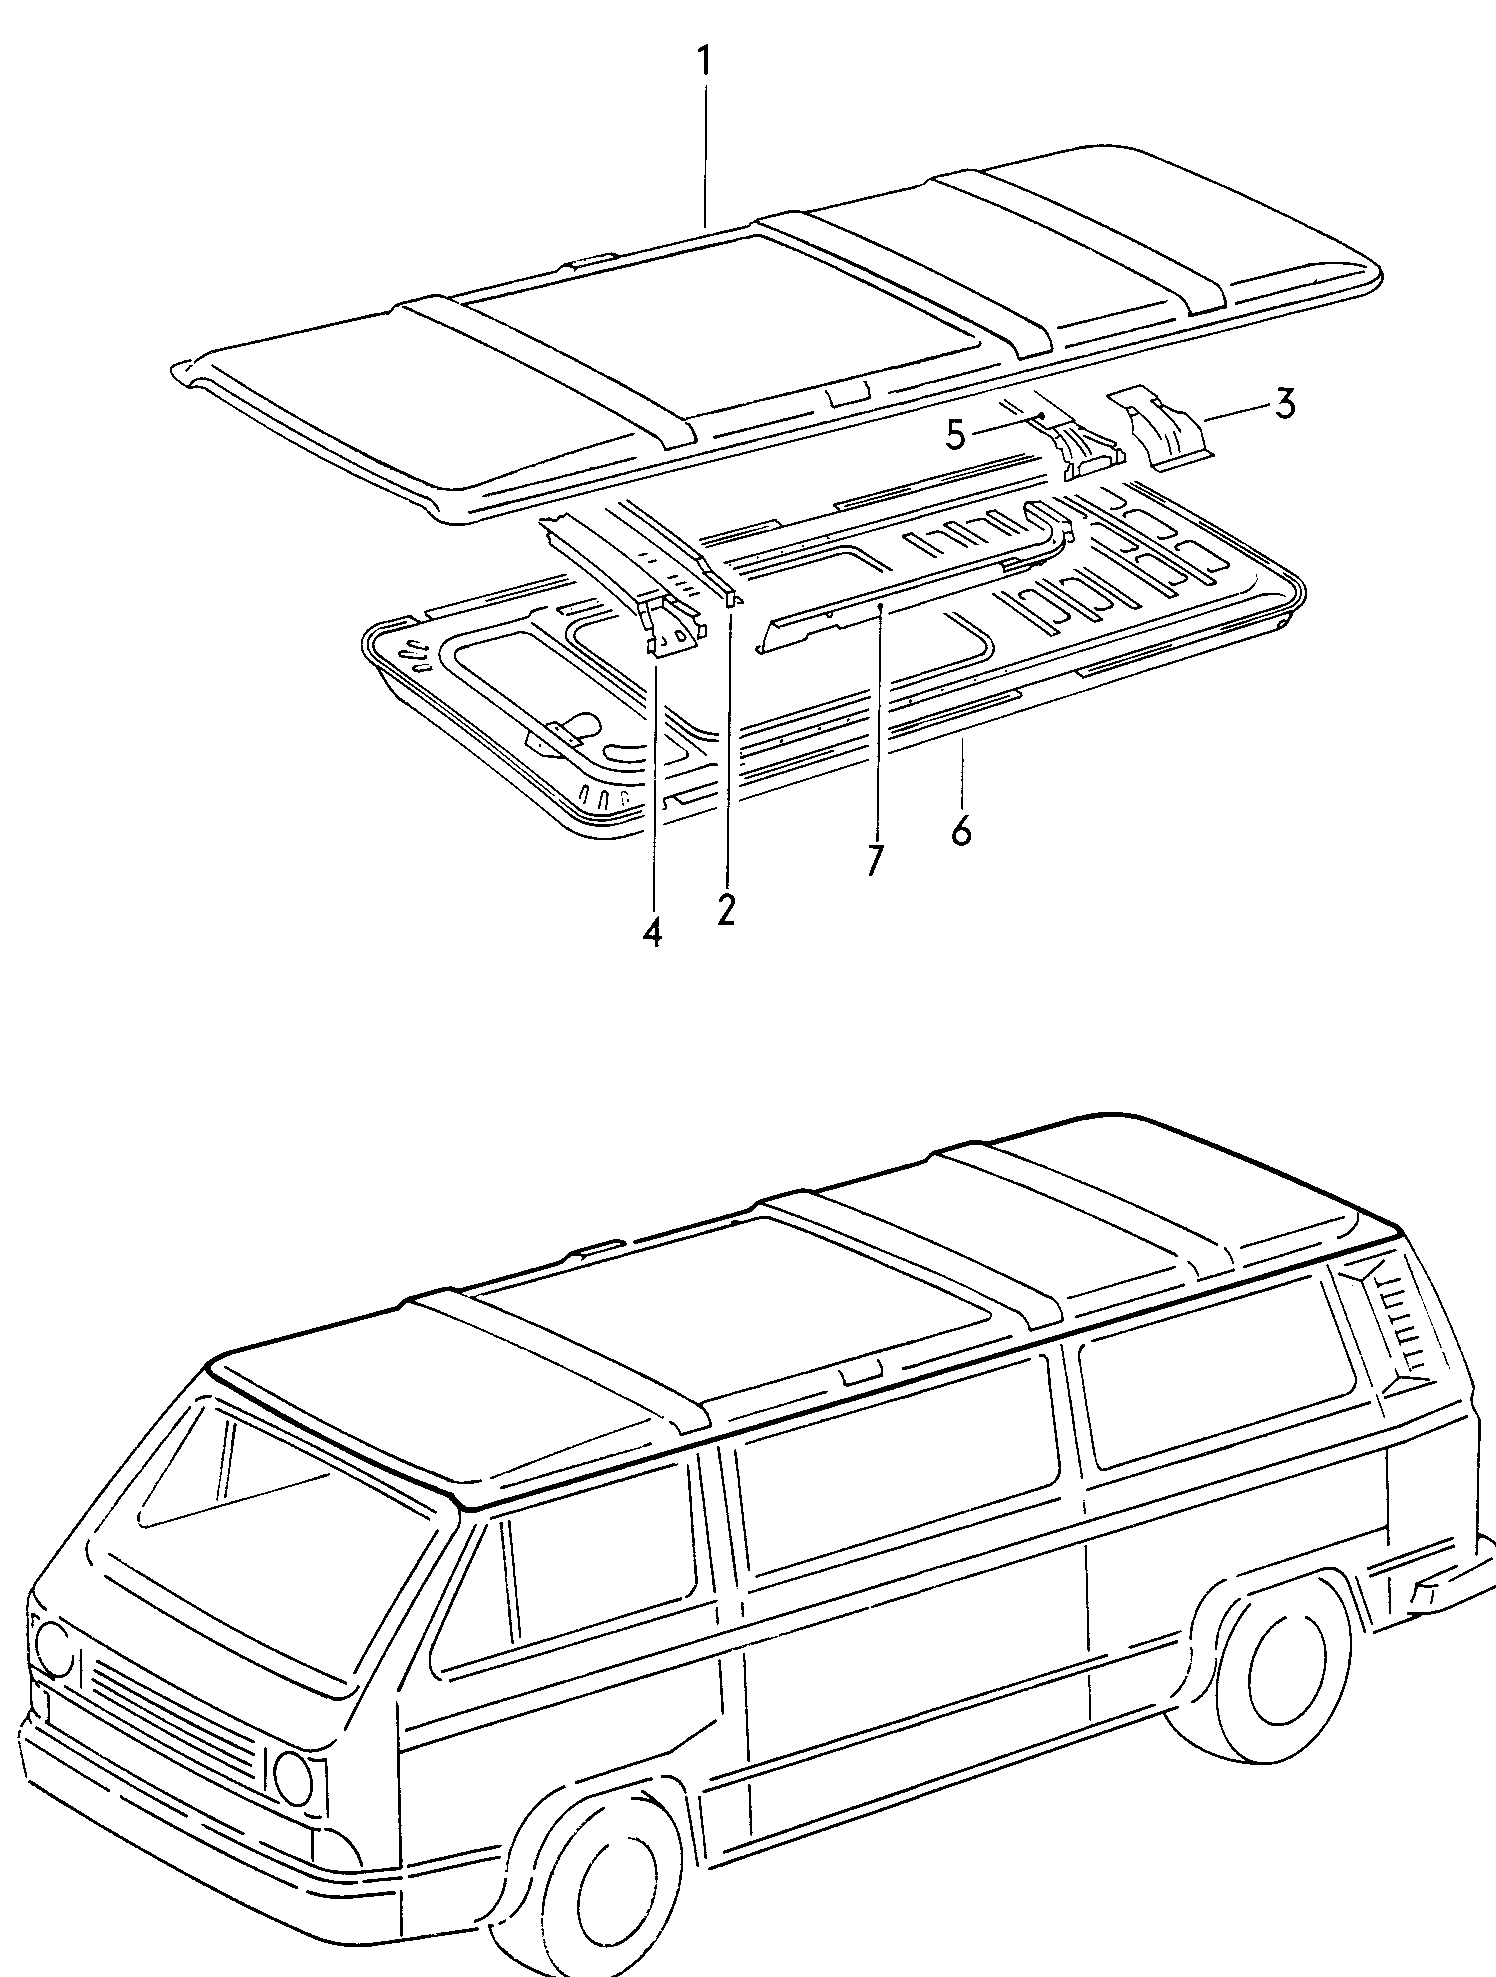 RoofFor vehicles with manual<br>sliding roof actuation  - Typ 2/syncro - t2